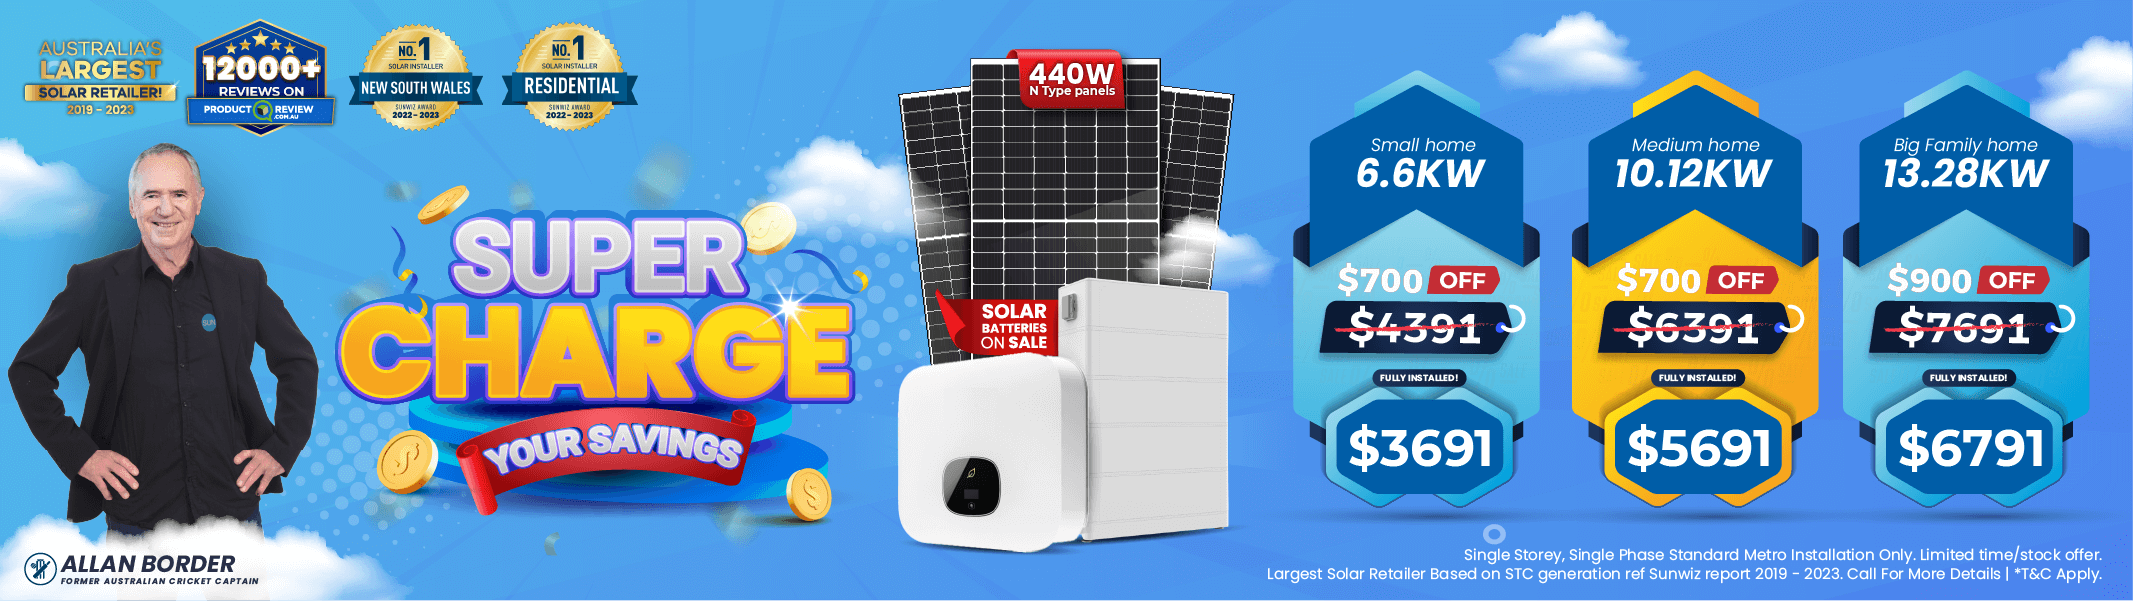 solar panels price NSW by Sunboost